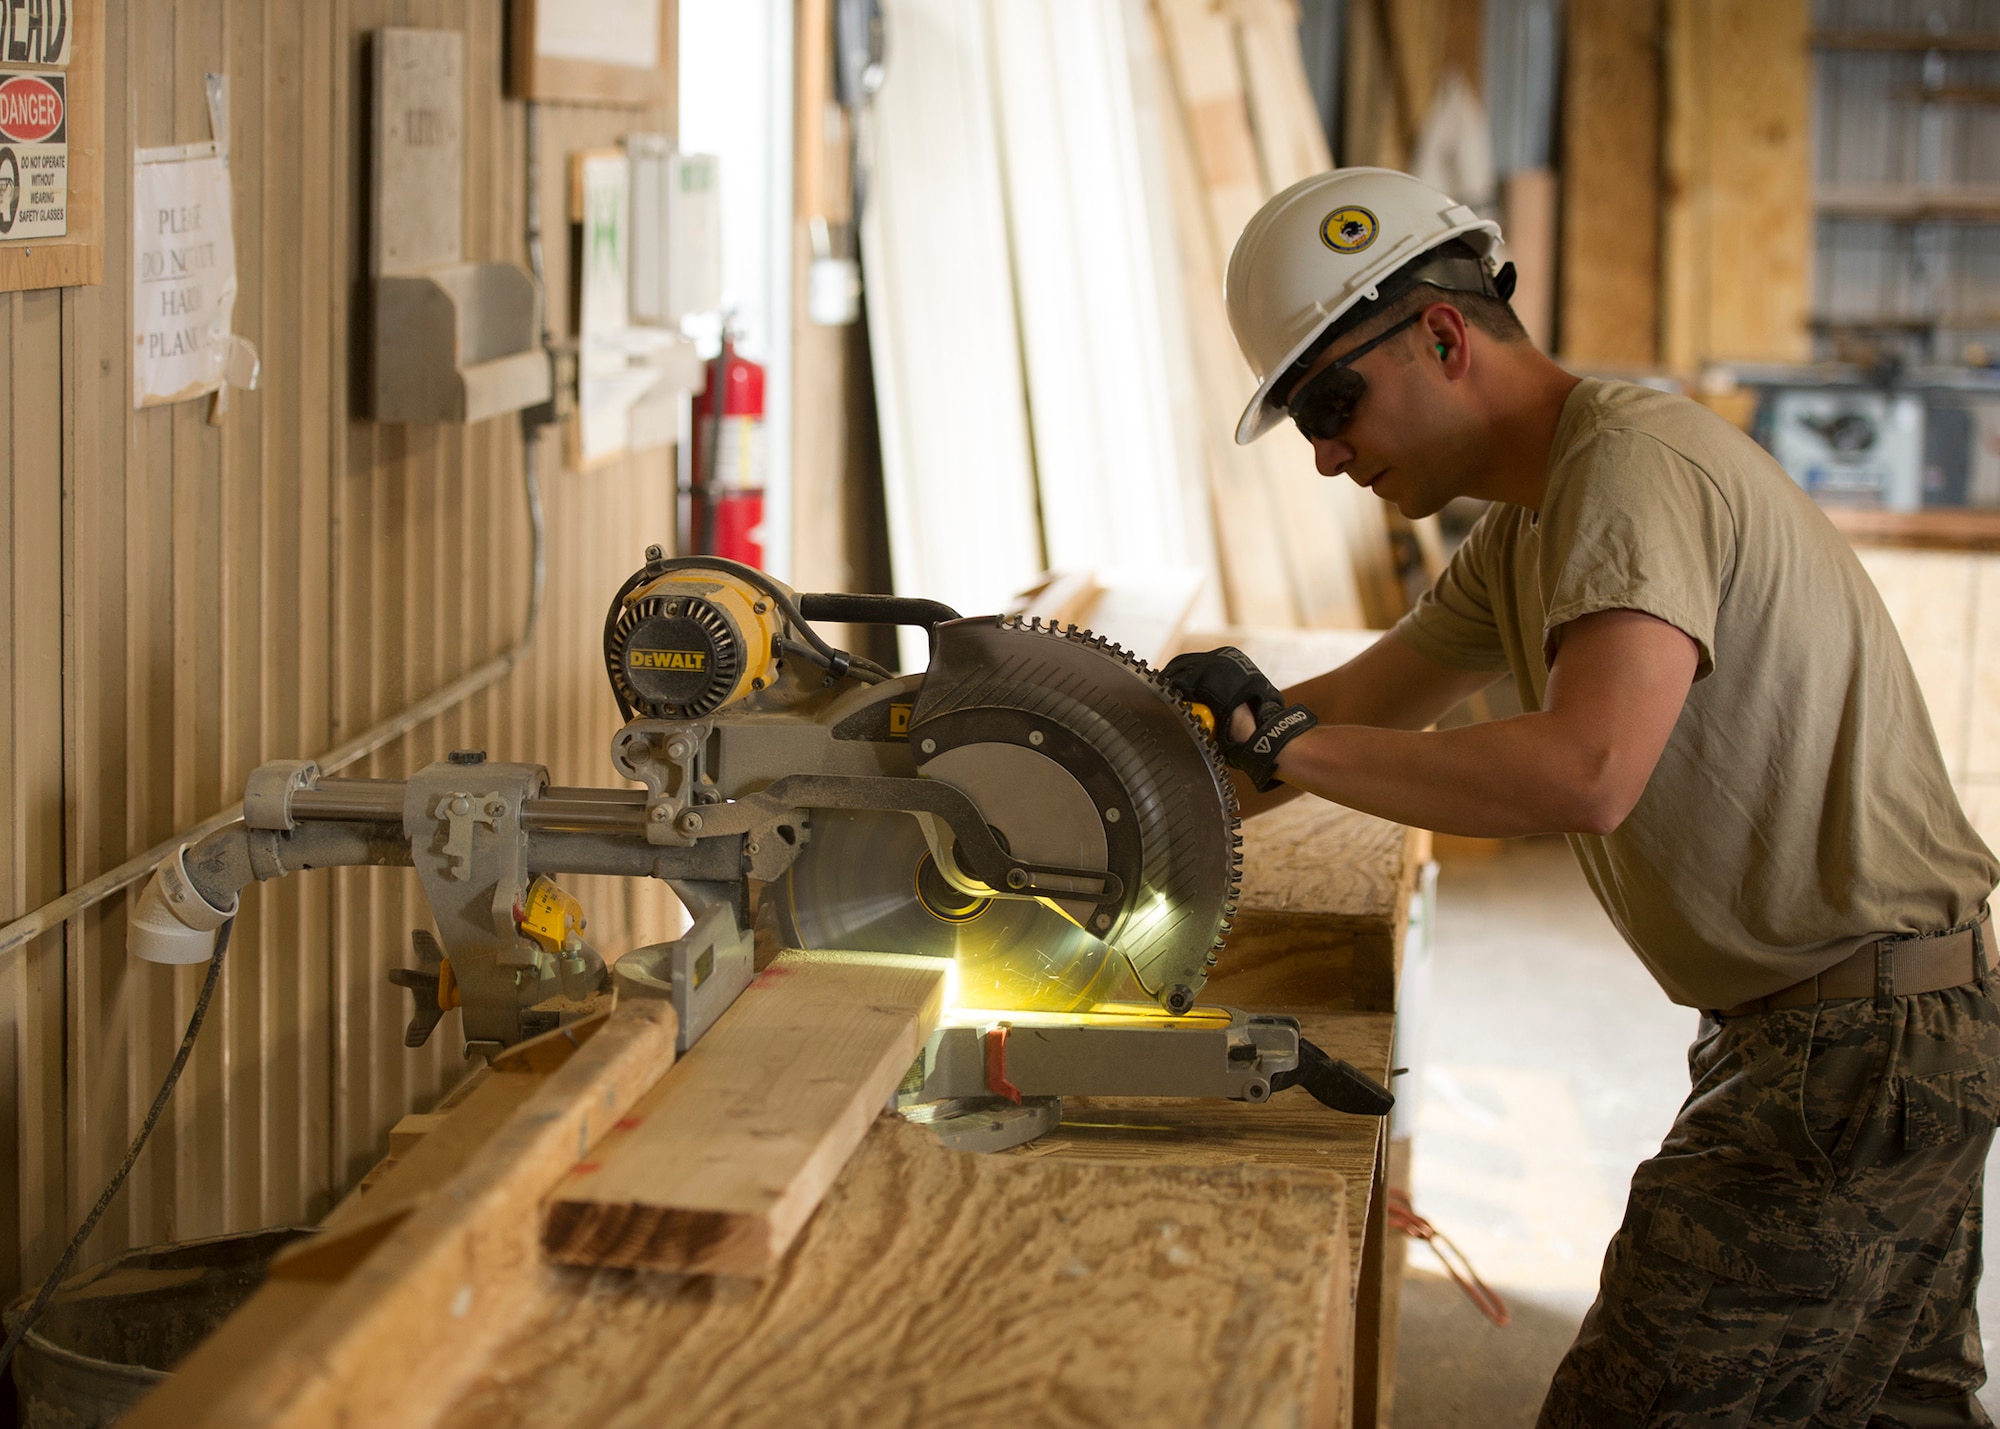 Staff Sgt. John Gibson, 446th Civil Engineer Squadron structures technician, cuts a piece of wood to the proper length for a house under construction in Gallup, NM, June 13, 2016. Rainier Wing Citizen Airmen participated in Operation Footprint, a partnership of the Southwest Indian Foundation and the Department of Defense’s Innovative Readiness Training program, which provides an avenue for training military members. The two-week training allowed Citizen Airmen to construct homes, which will be given to tribal members of the Navajo Nation who are in need. (U.S. Air Force Reserve photo by Tech. Sgt. Bryan Hull)